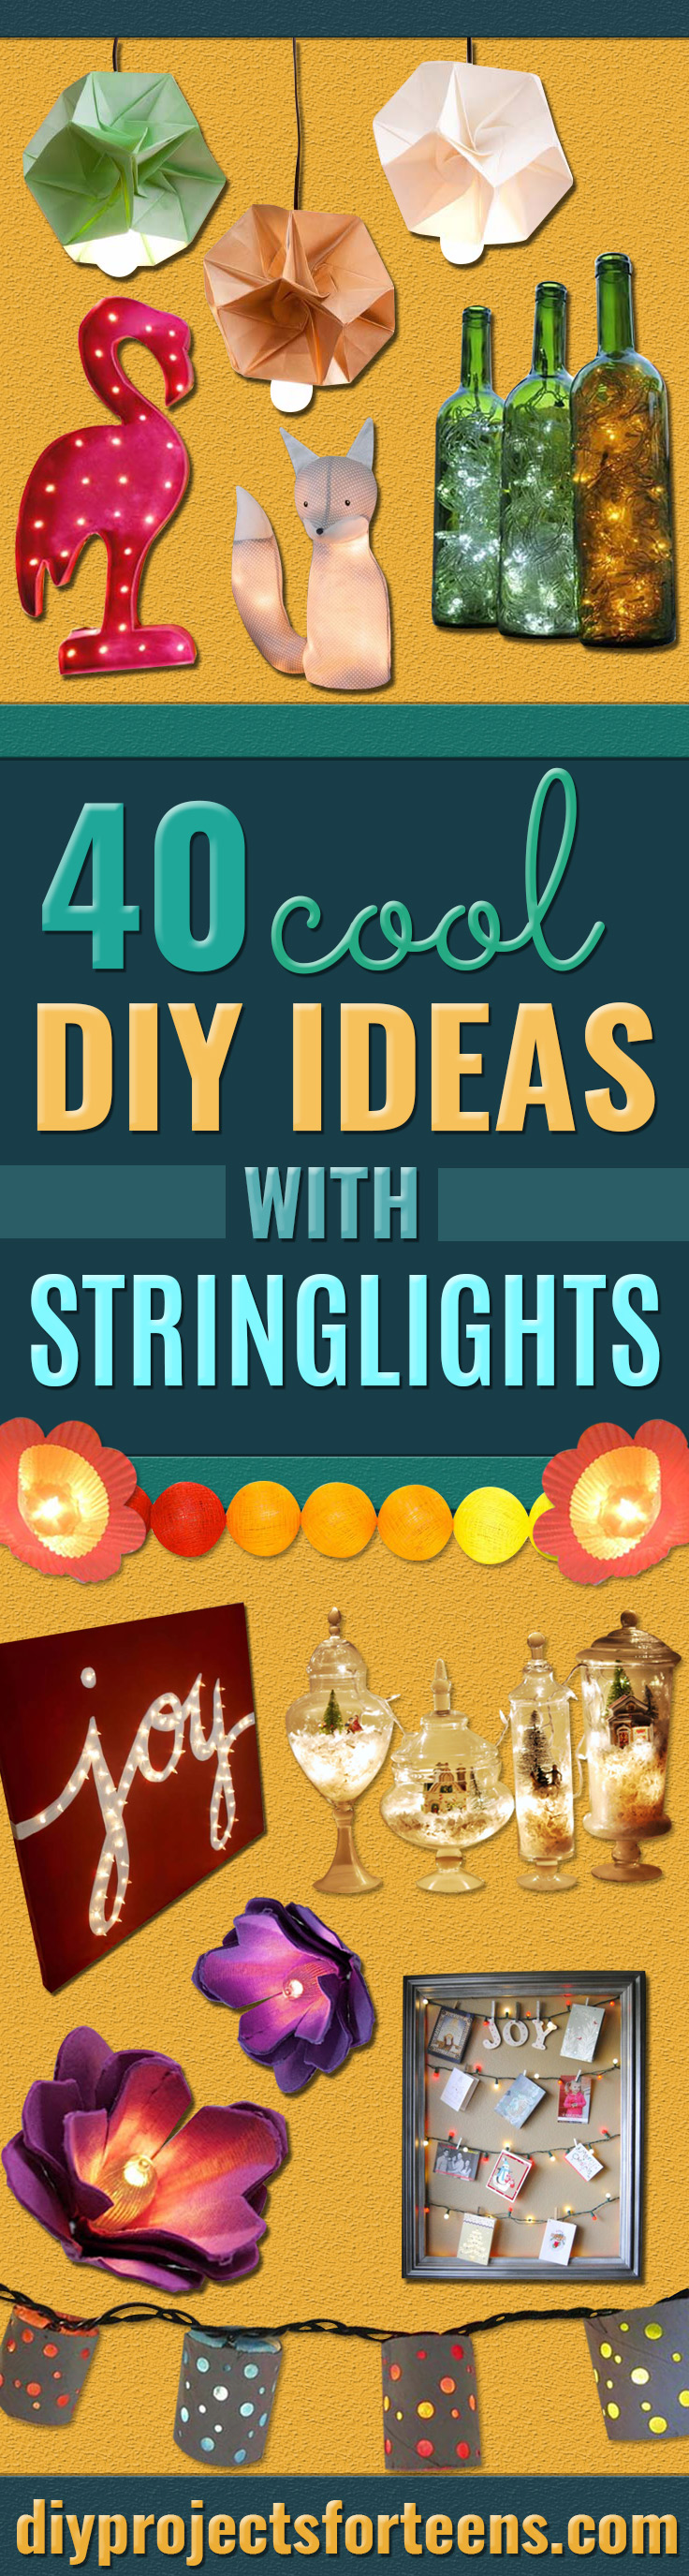 Cool Ways To Use Christmas Lights -Best Easy DIY Ideas for String Lights for Room Decoration, Home Decor and Creative DIY Bedroom Lighting - Creative Christmas Light Tutorials with Step by Step Instructions - Creative Crafts and DIY Projects for Teens, Teenagers and Adults #diyideas #stringlights #diydecor #teencrafts